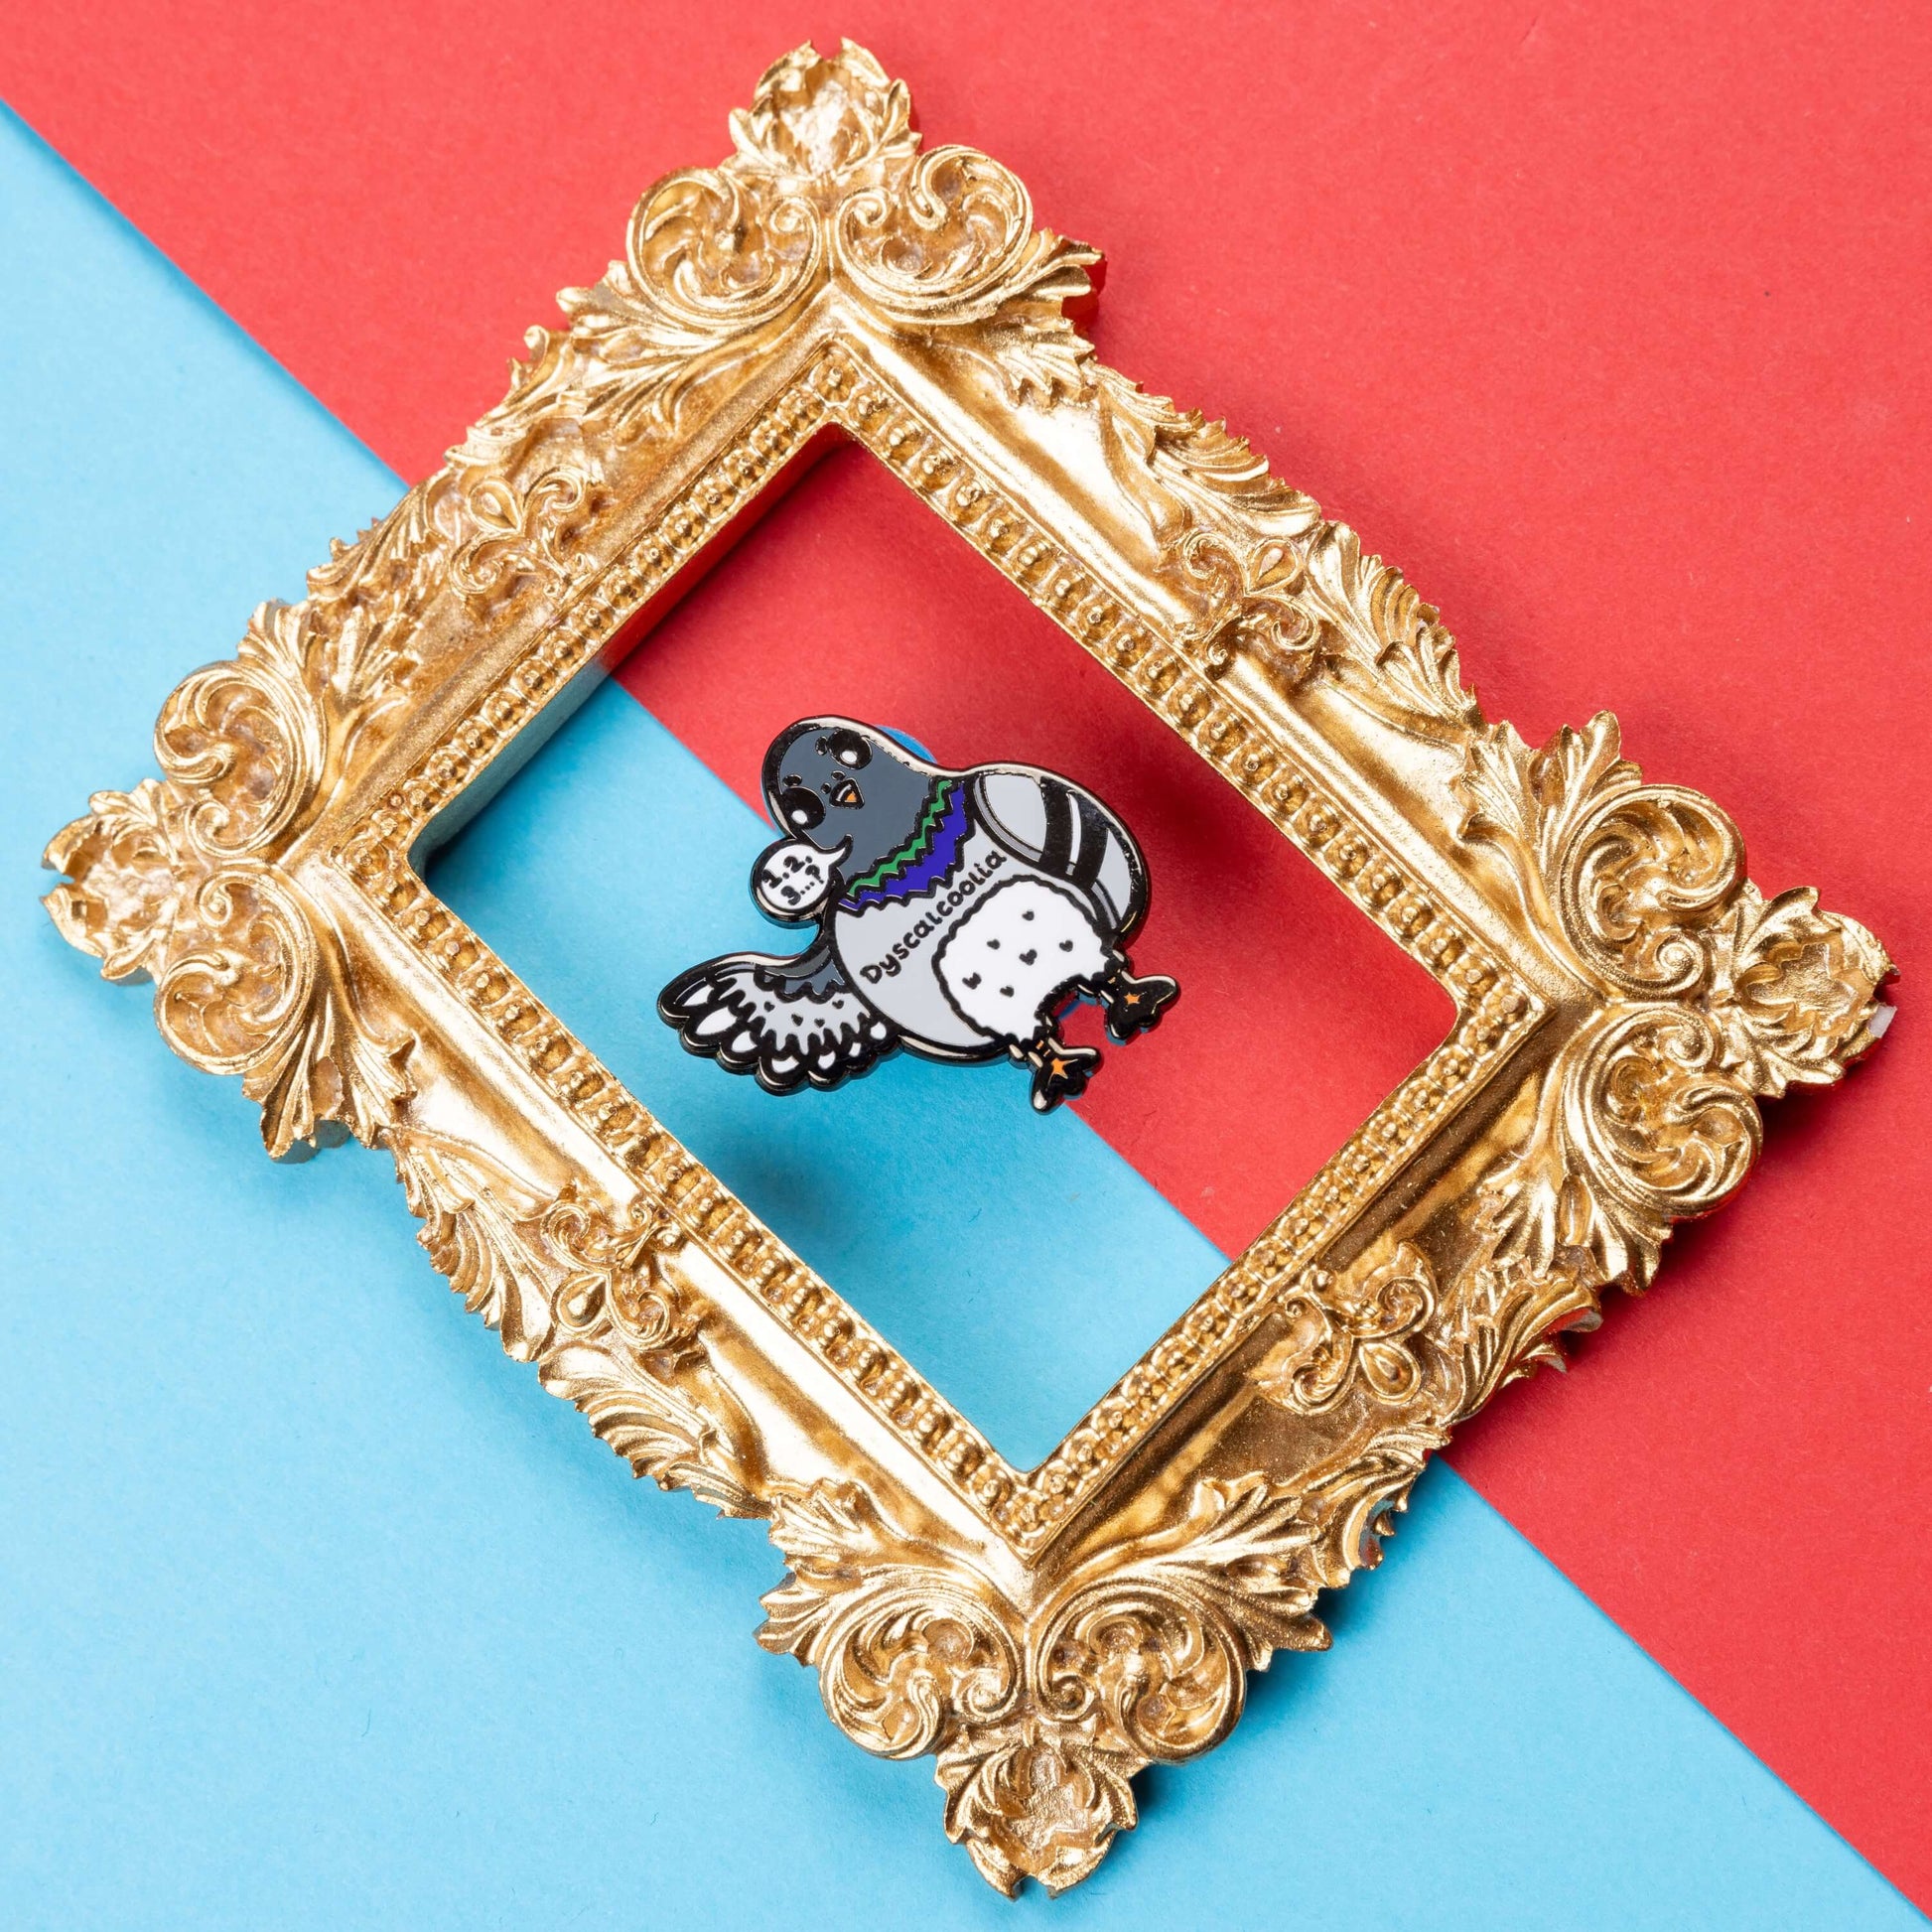 The Dyscalcoolia Pigeon Enamel Pin - Dyscalculia on a red and blue background in a gold ornate frame. A Pigeon looking confused holding up a wing with a speech bubble full of numbers and a question mark across its chest reads 'dyscalcoolia'. The enamel pin is raising awareness for dyscalculia.